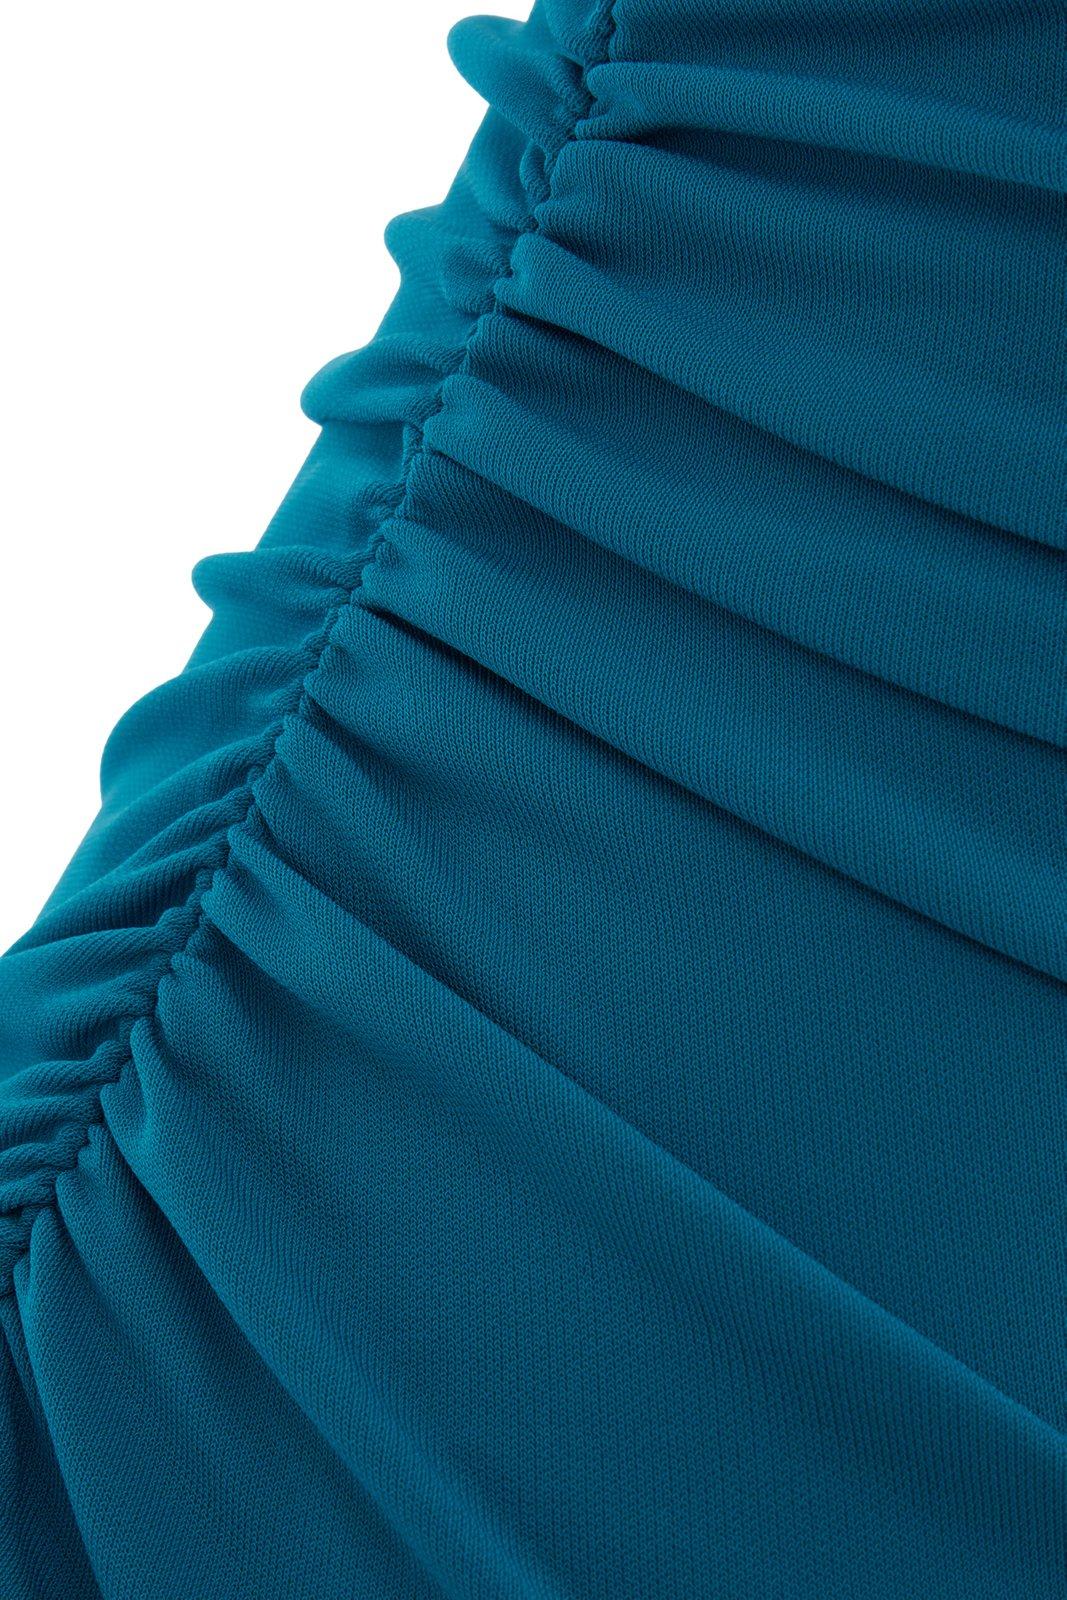 Shop Alberta Ferretti Ruched Short-sleeved Dress In Turquoise